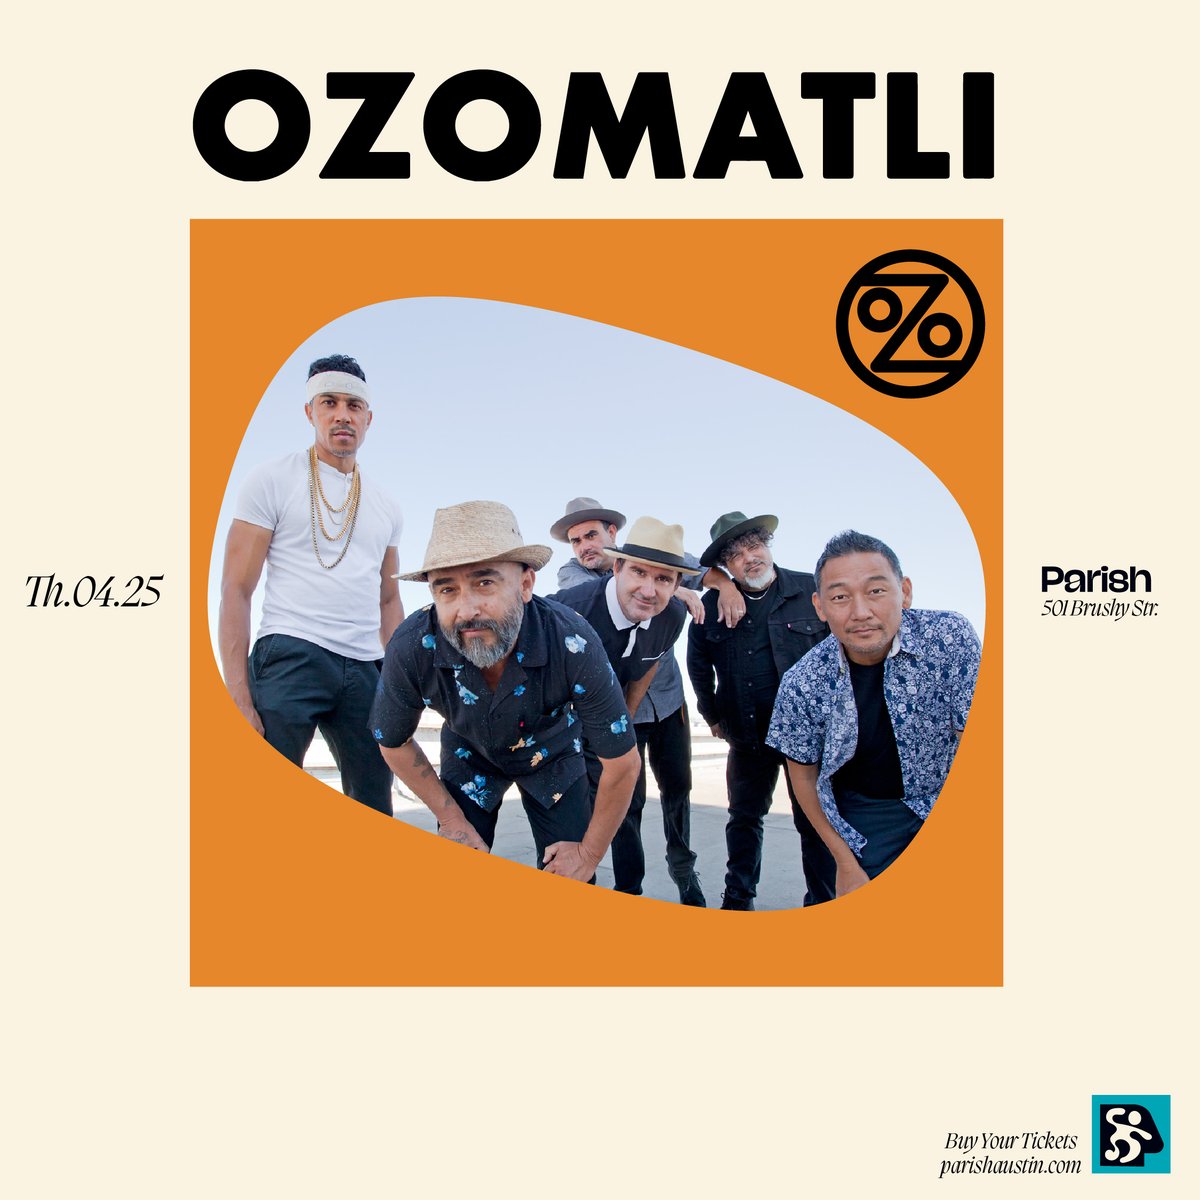 Austin Fam 🚨 we’re coming back for you on April 25th for an amazing show at Parish! Secure your tickets now, and we can’t wait to see you soon! 🎟️ ozomatli.com/tour/